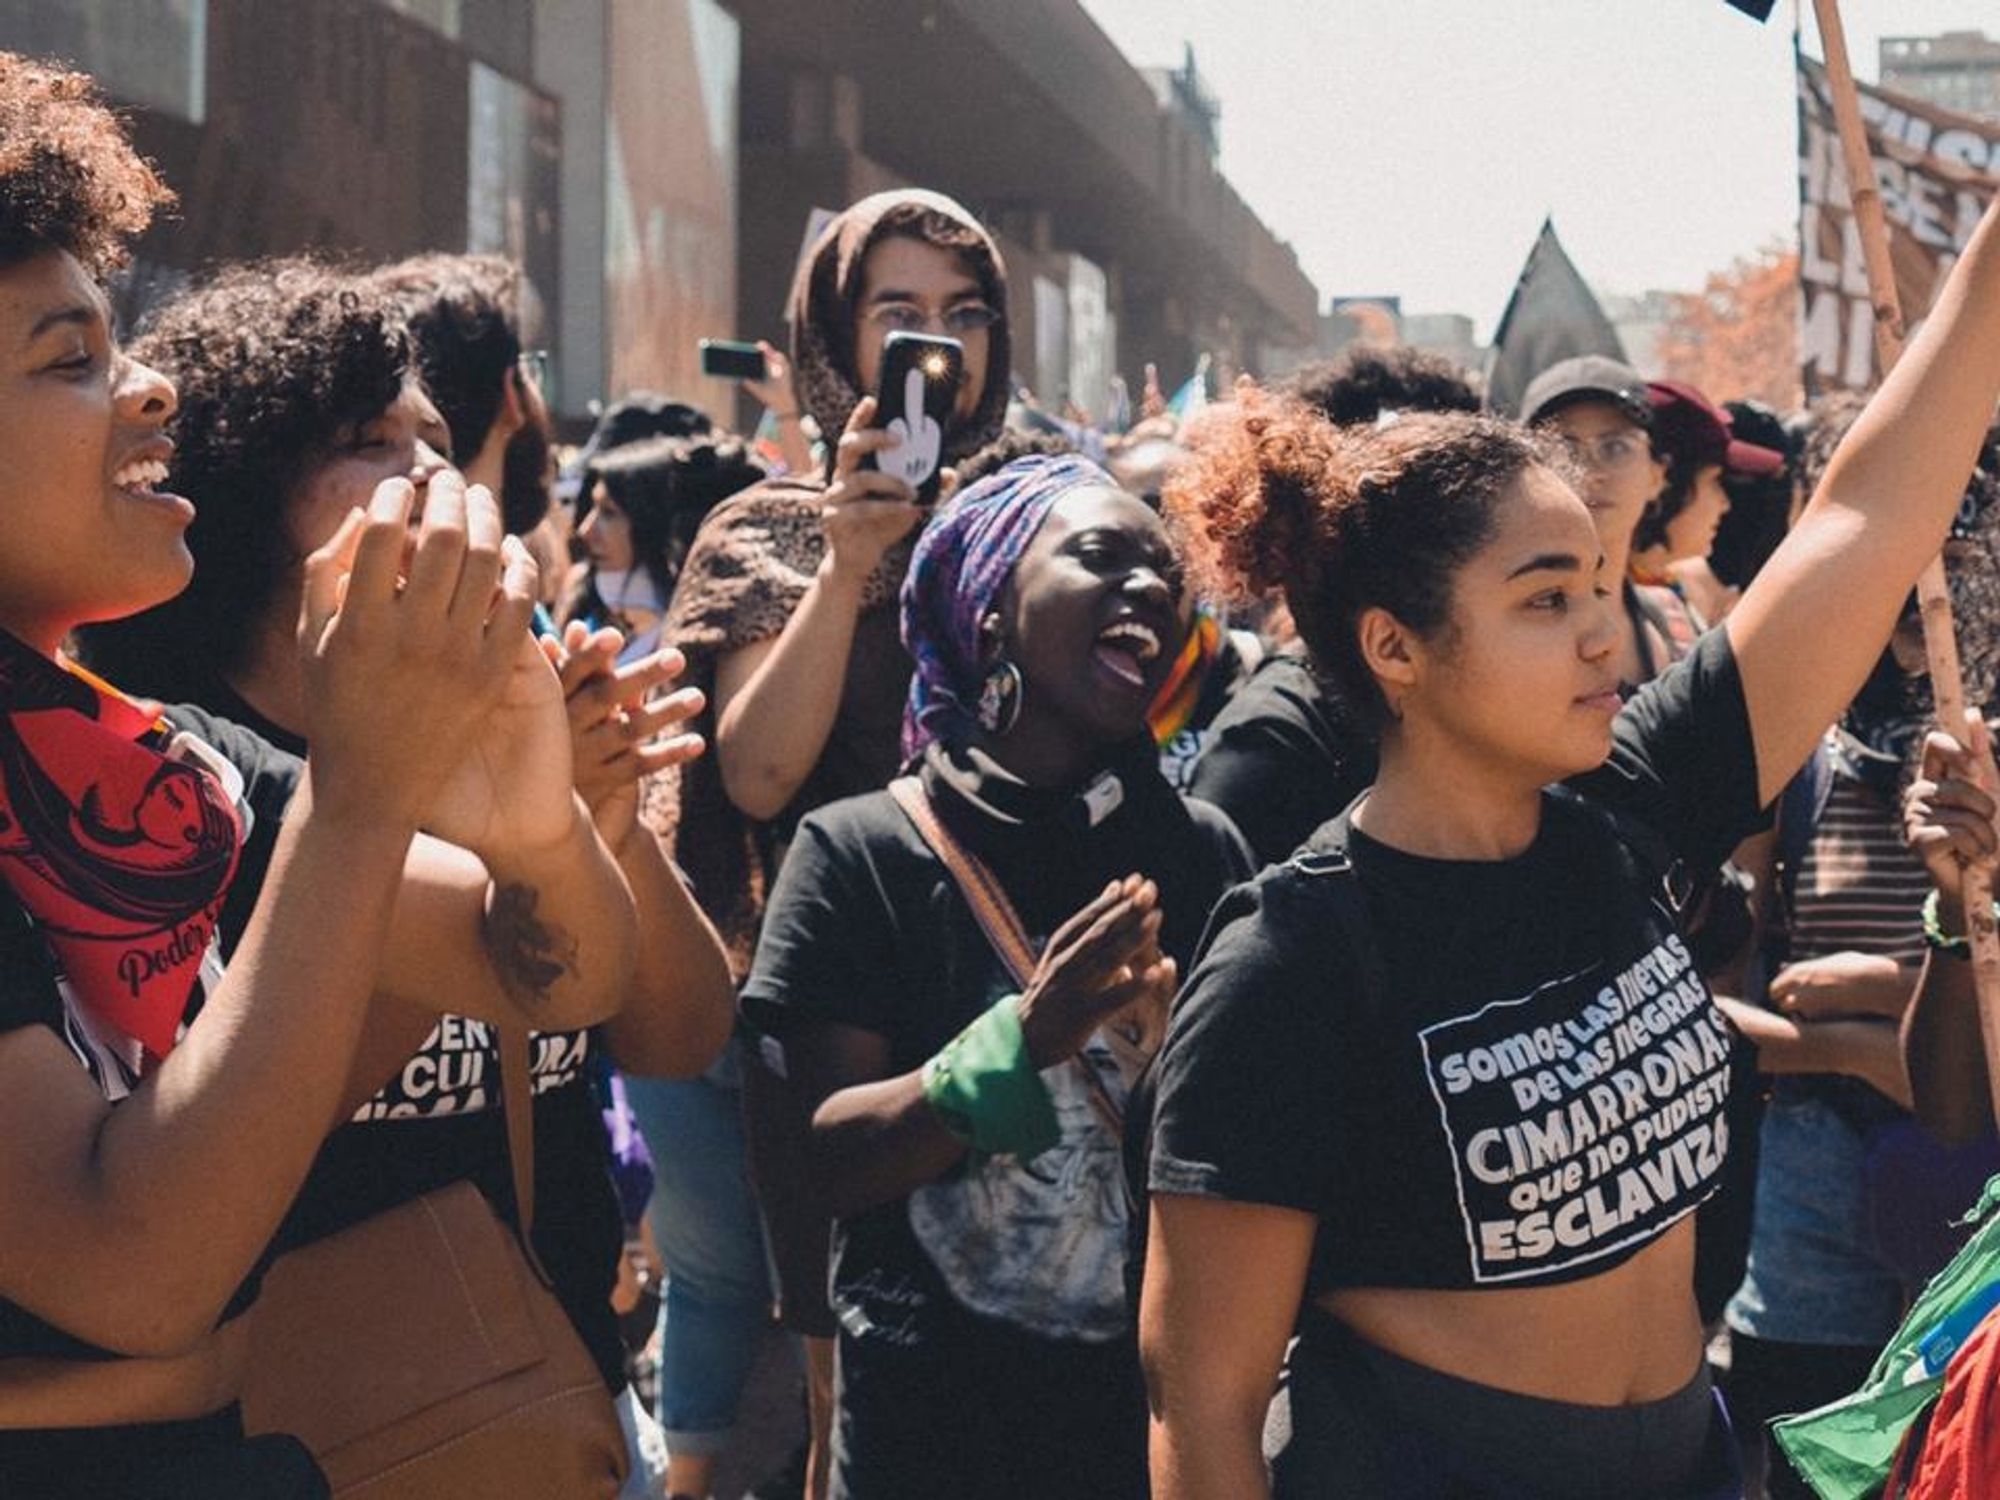 Black Chilean feminists marching with raised fists